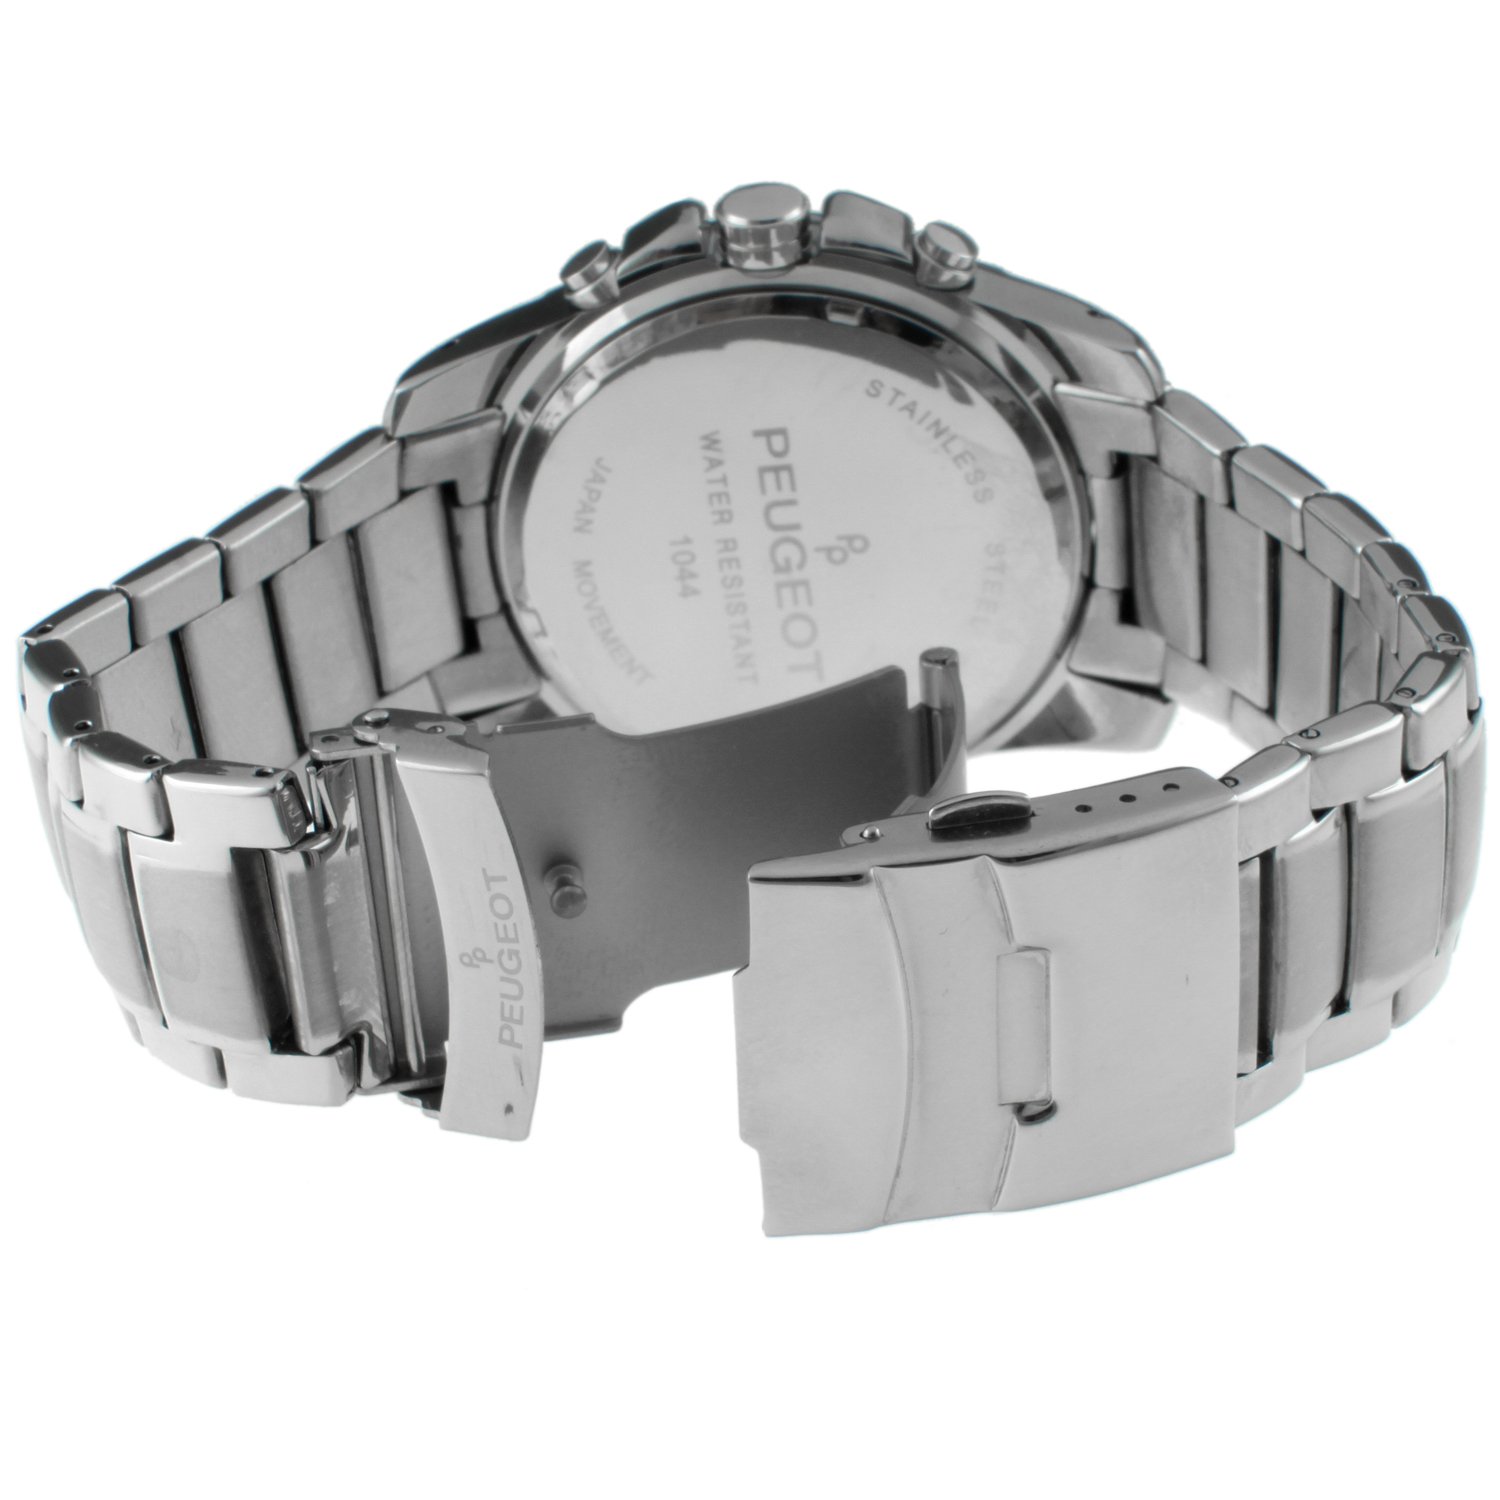 Peugeot Men's Multi-Function Sports Watch - Large Dial with Calendar wWindow and Metal Bracelet